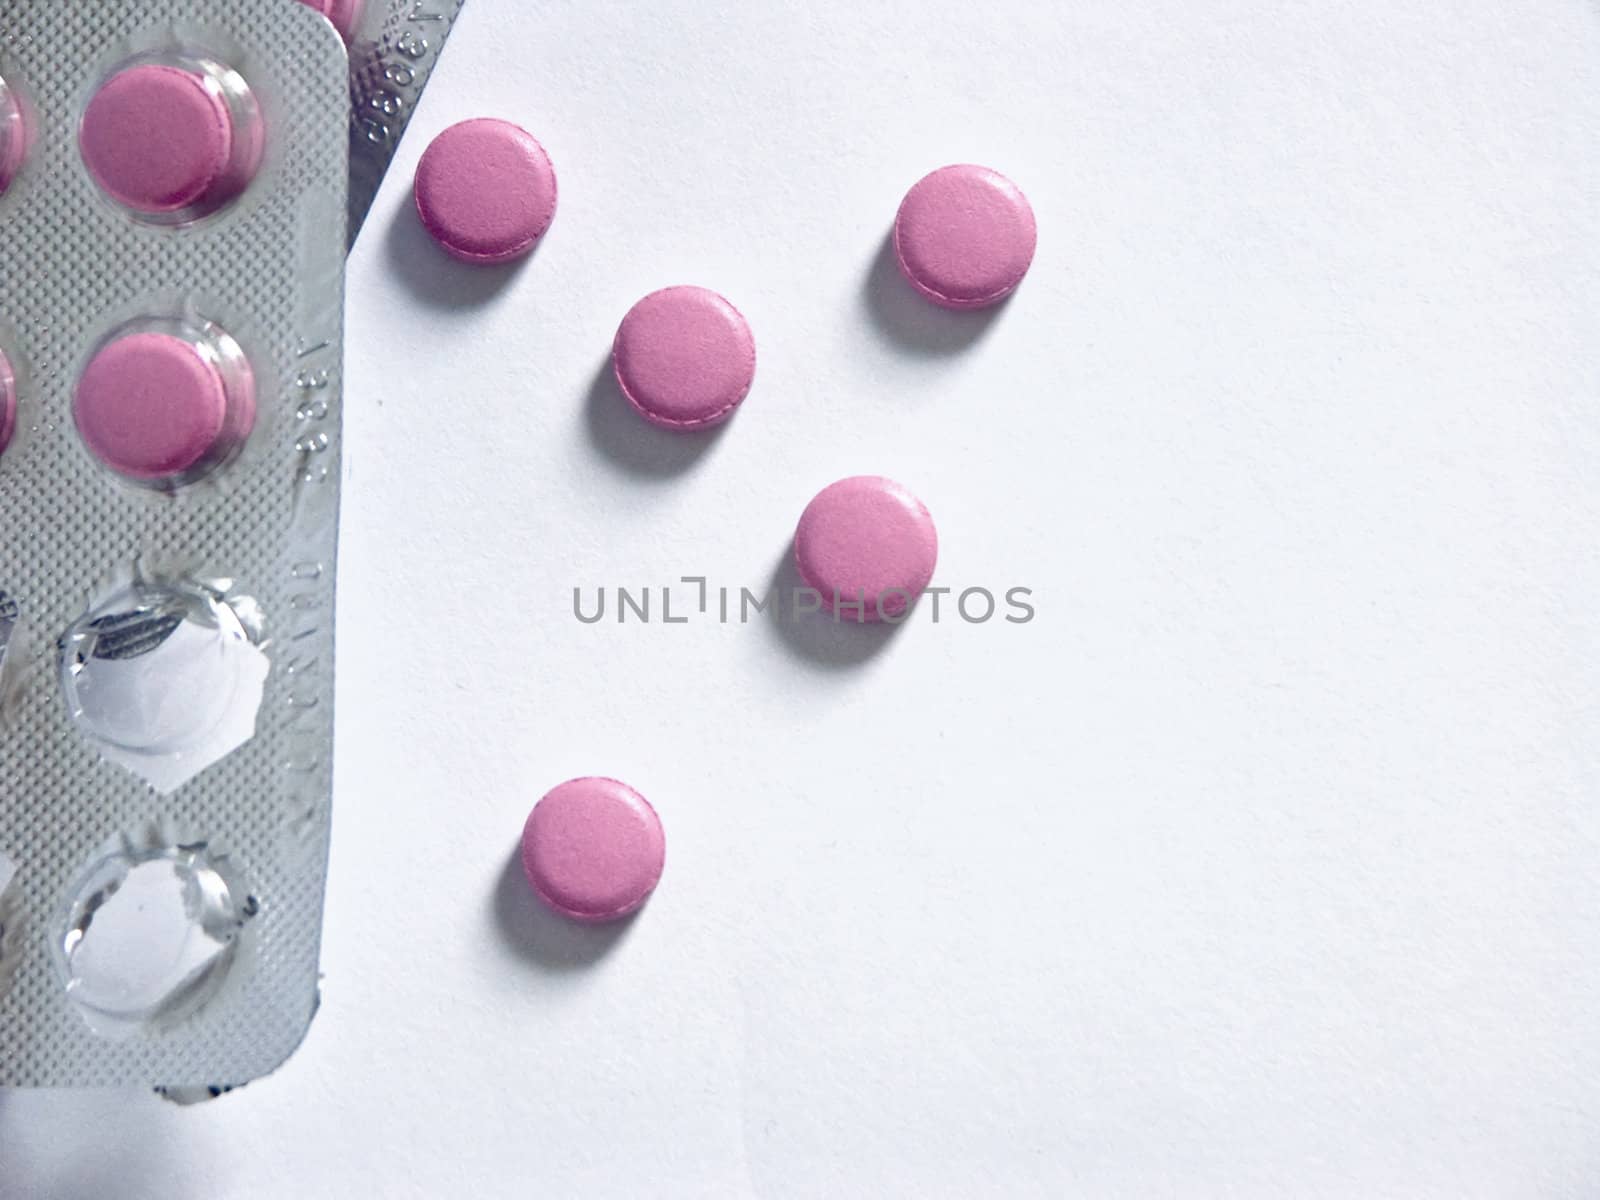 The image of tablets on a white background